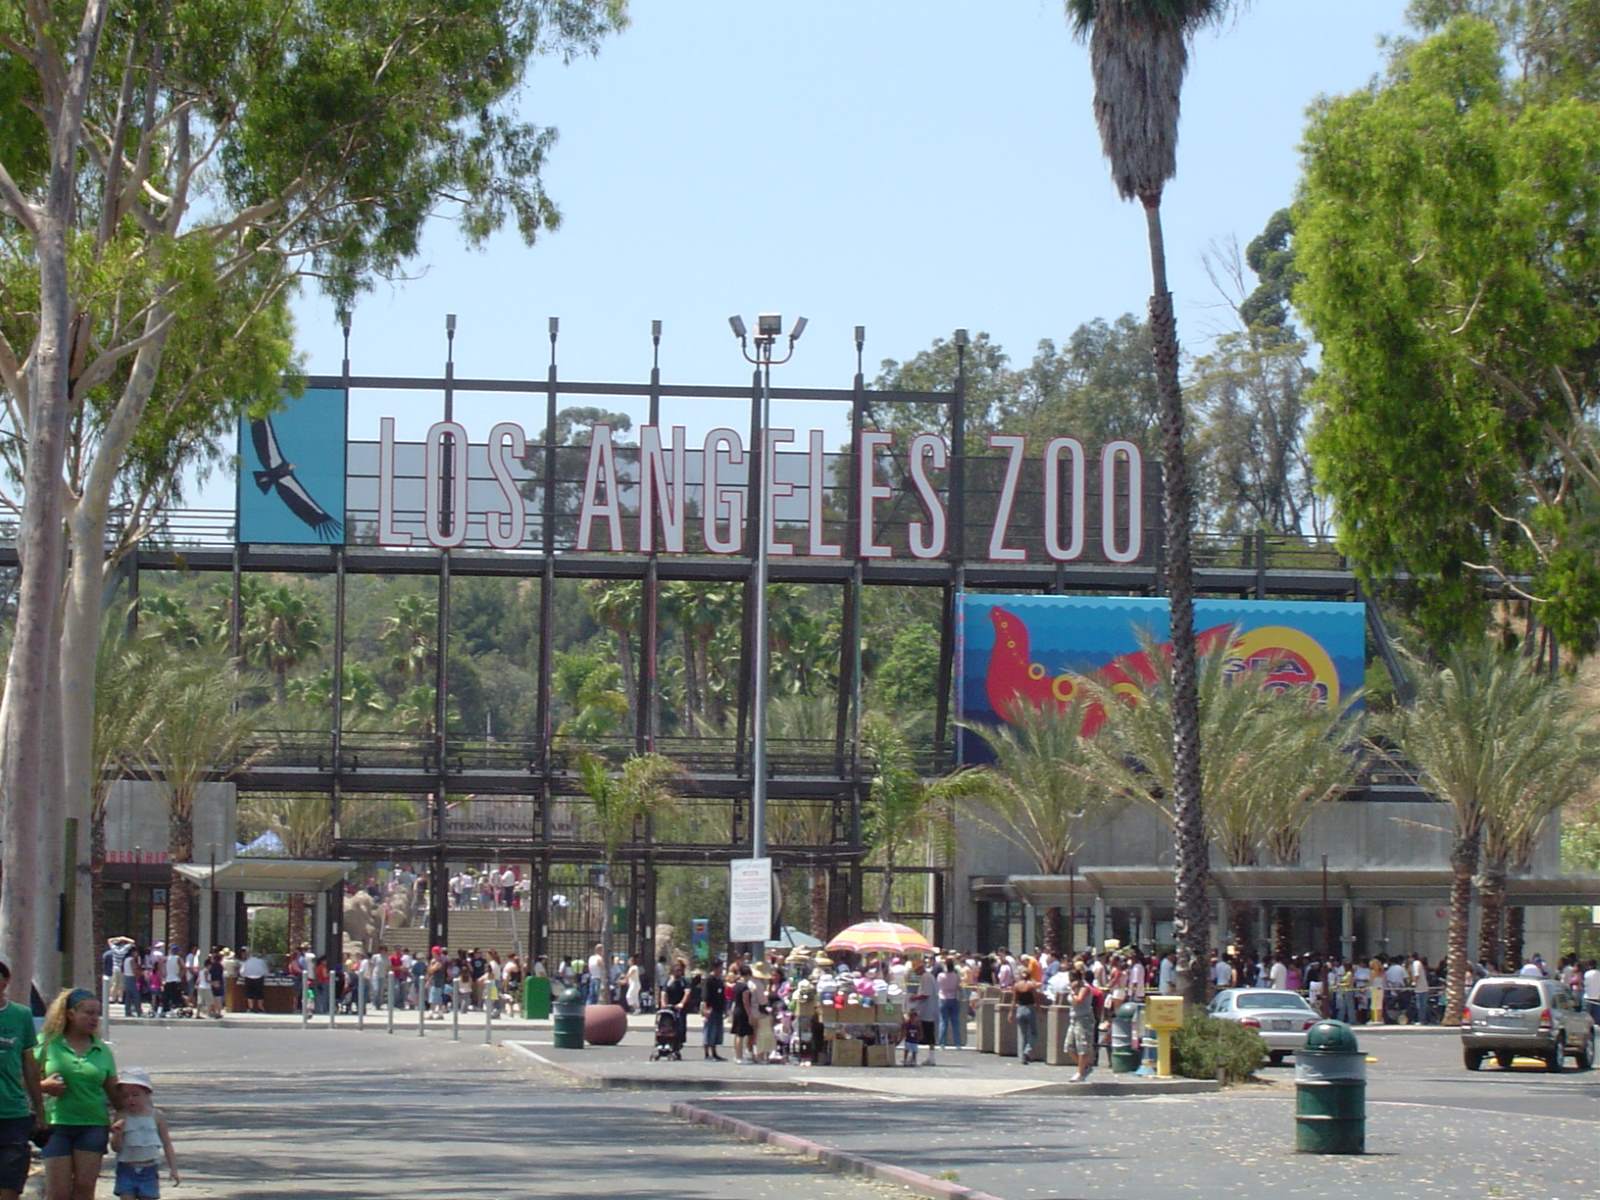 16-extraordinary-facts-about-los-angeles-zoo